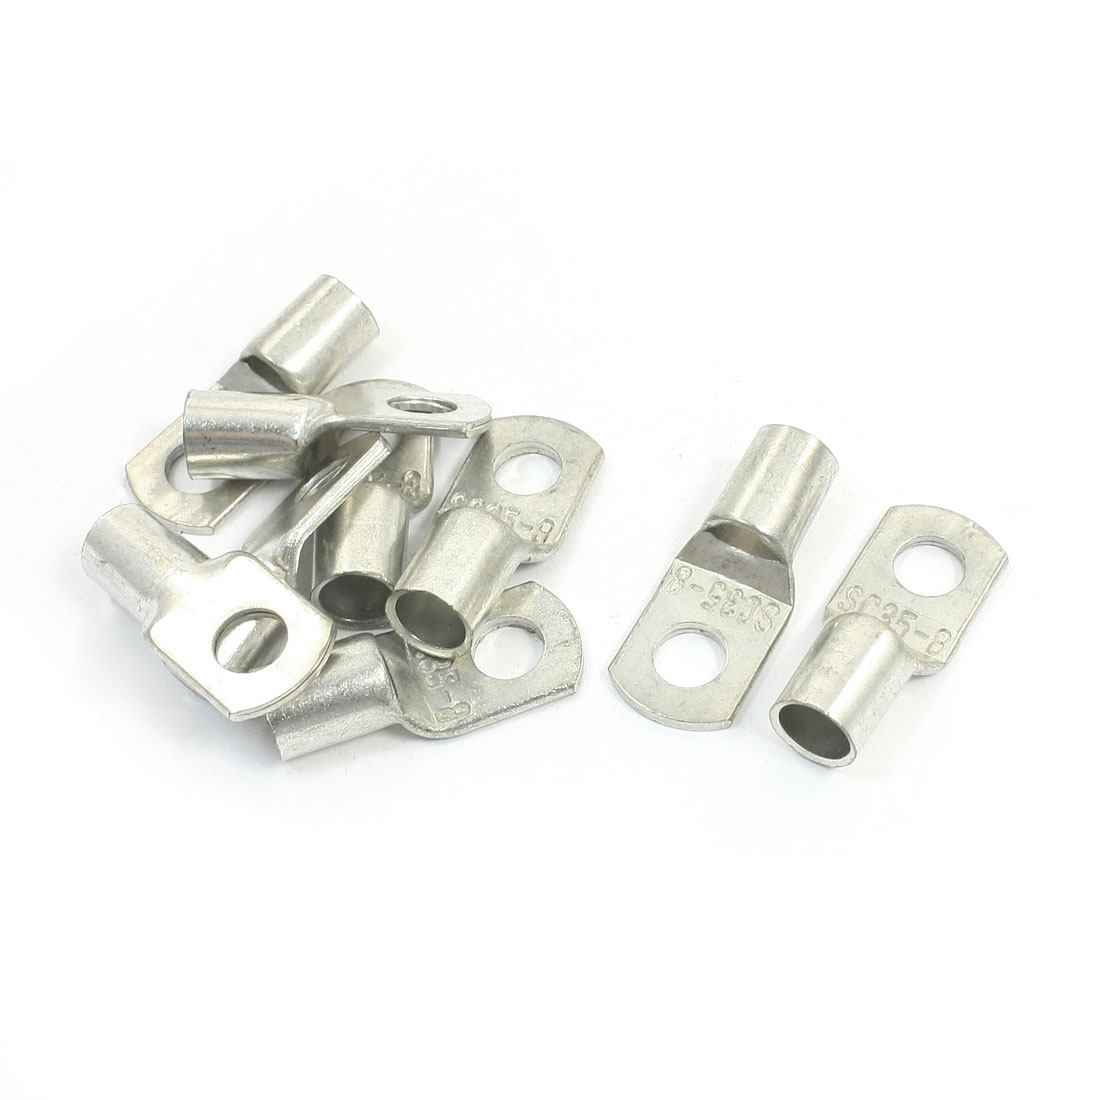 Unique Bargains 9pcs 8.4mm Crimping Type Metal Non-insulated Tube Terminal Lug Connector